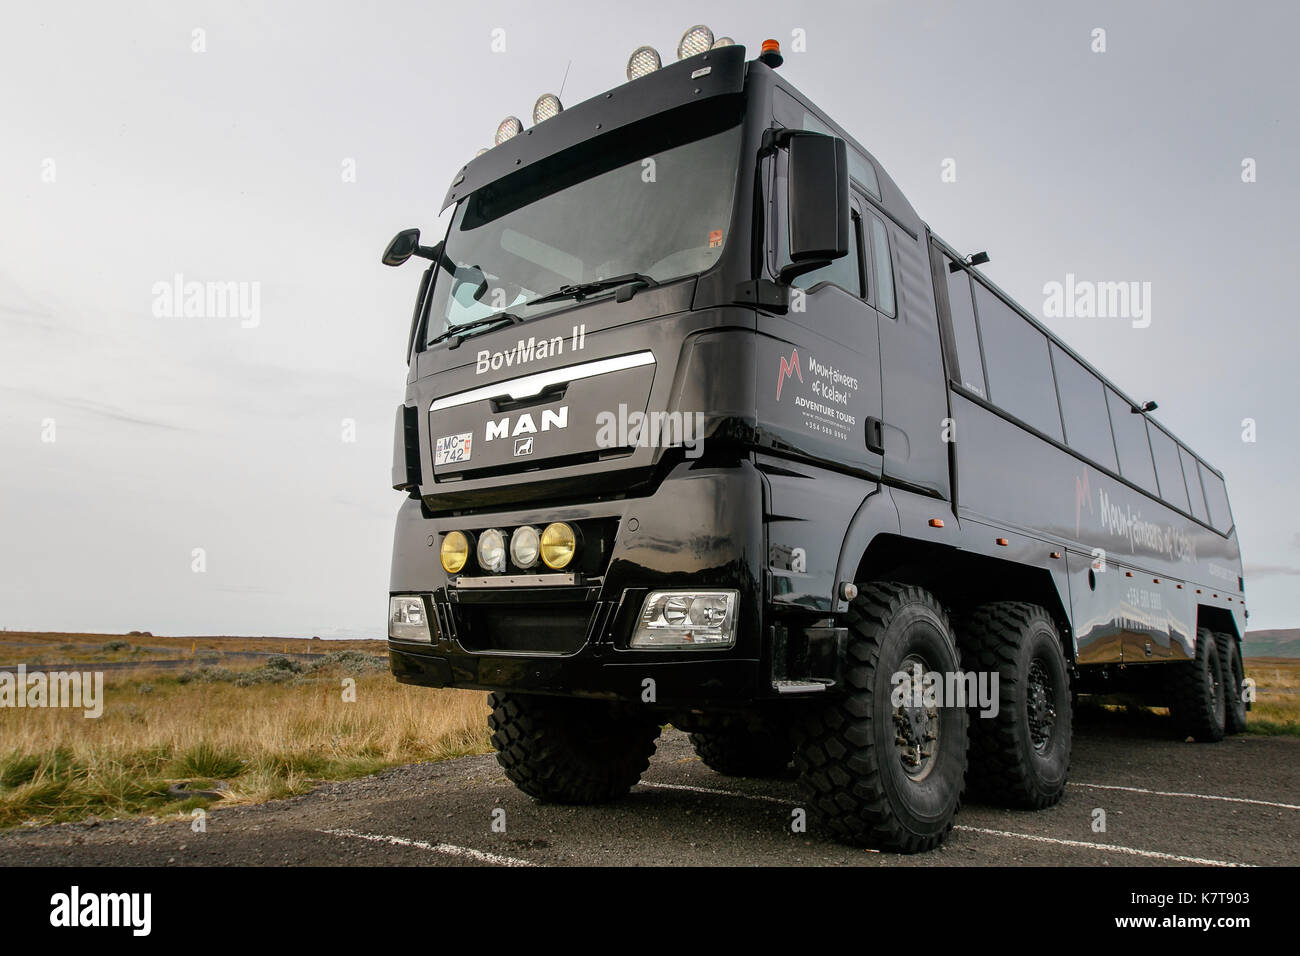 Specialty vehicle for off-roading and driving on snow in Iceland. Stock Photo